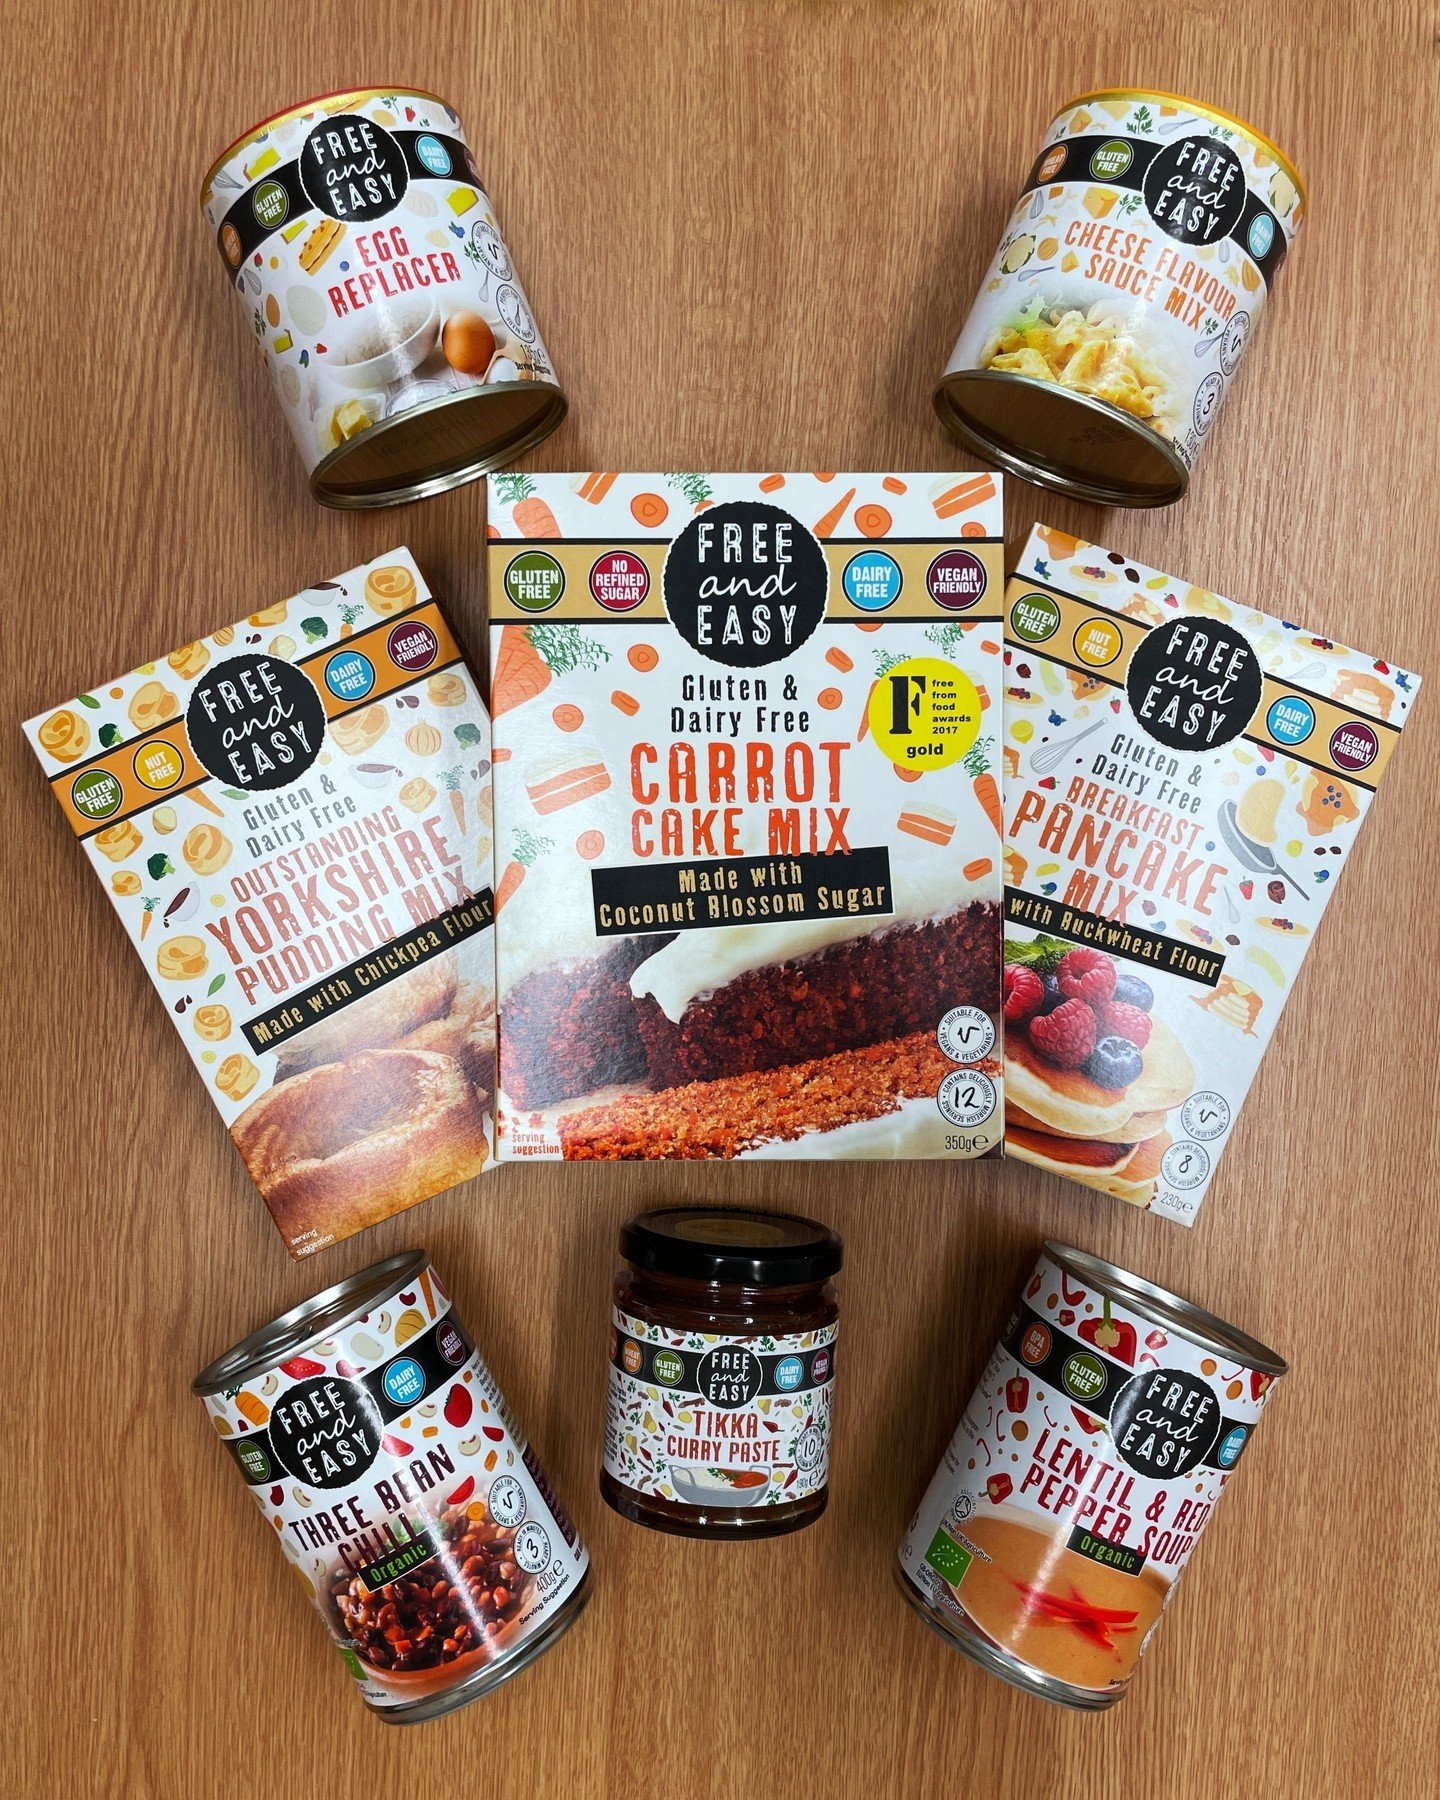 All of our products are created with allergies in mind, which is why ensure we keep a nut, gluten and dairy free factory.

We believe free-from meals shouldn't miss out on flavour, and you should be able to shop without having to triple check the lab